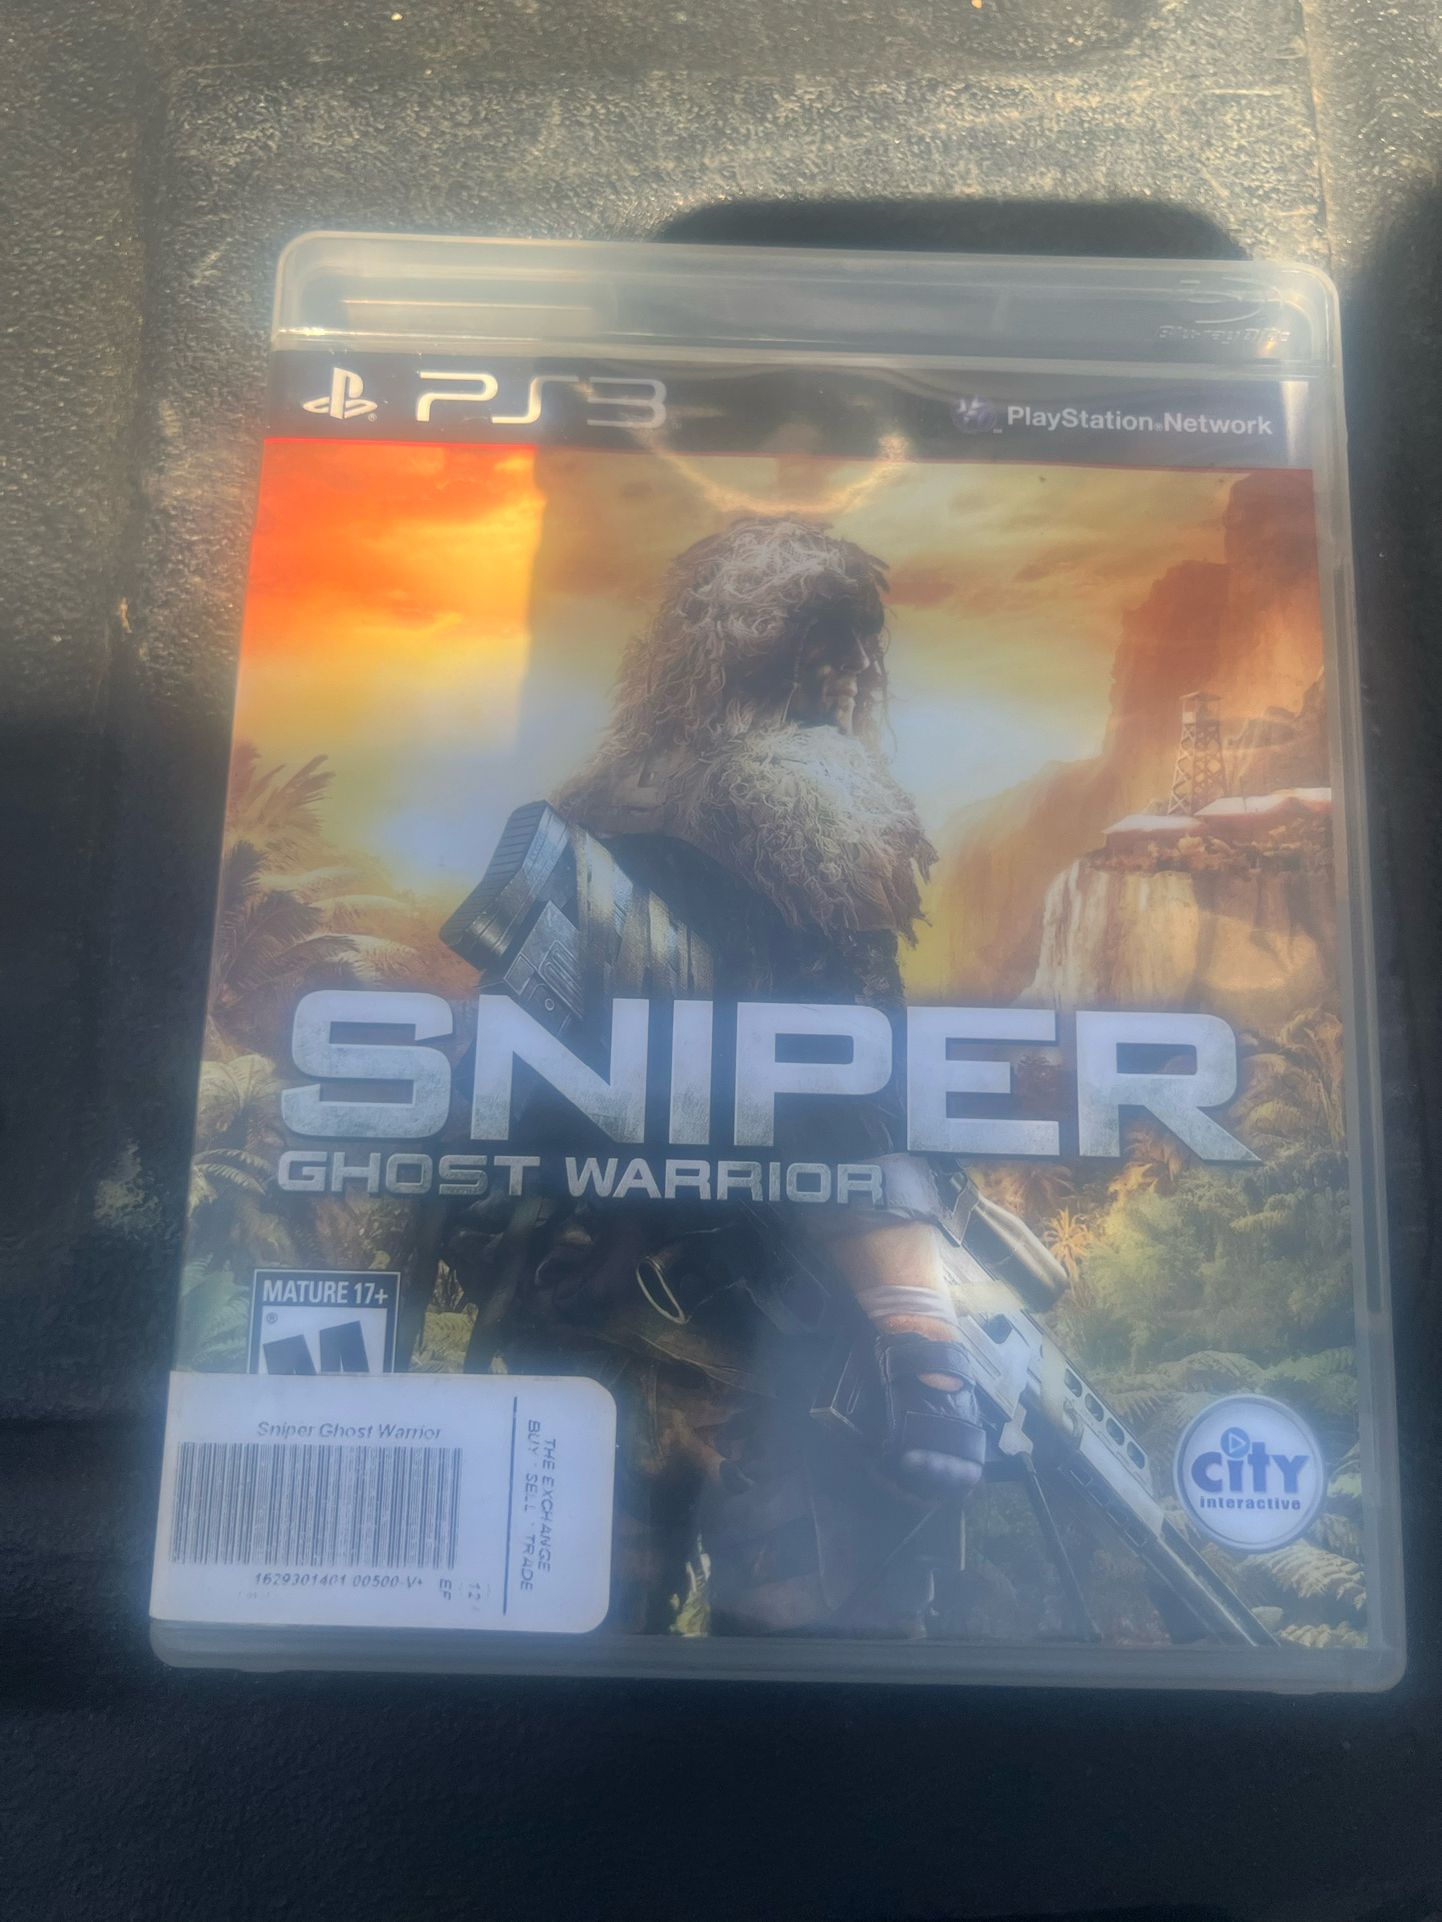 2011 "Sniper - Ghost Warrior" Sony PlayStation 3 PS3 Game